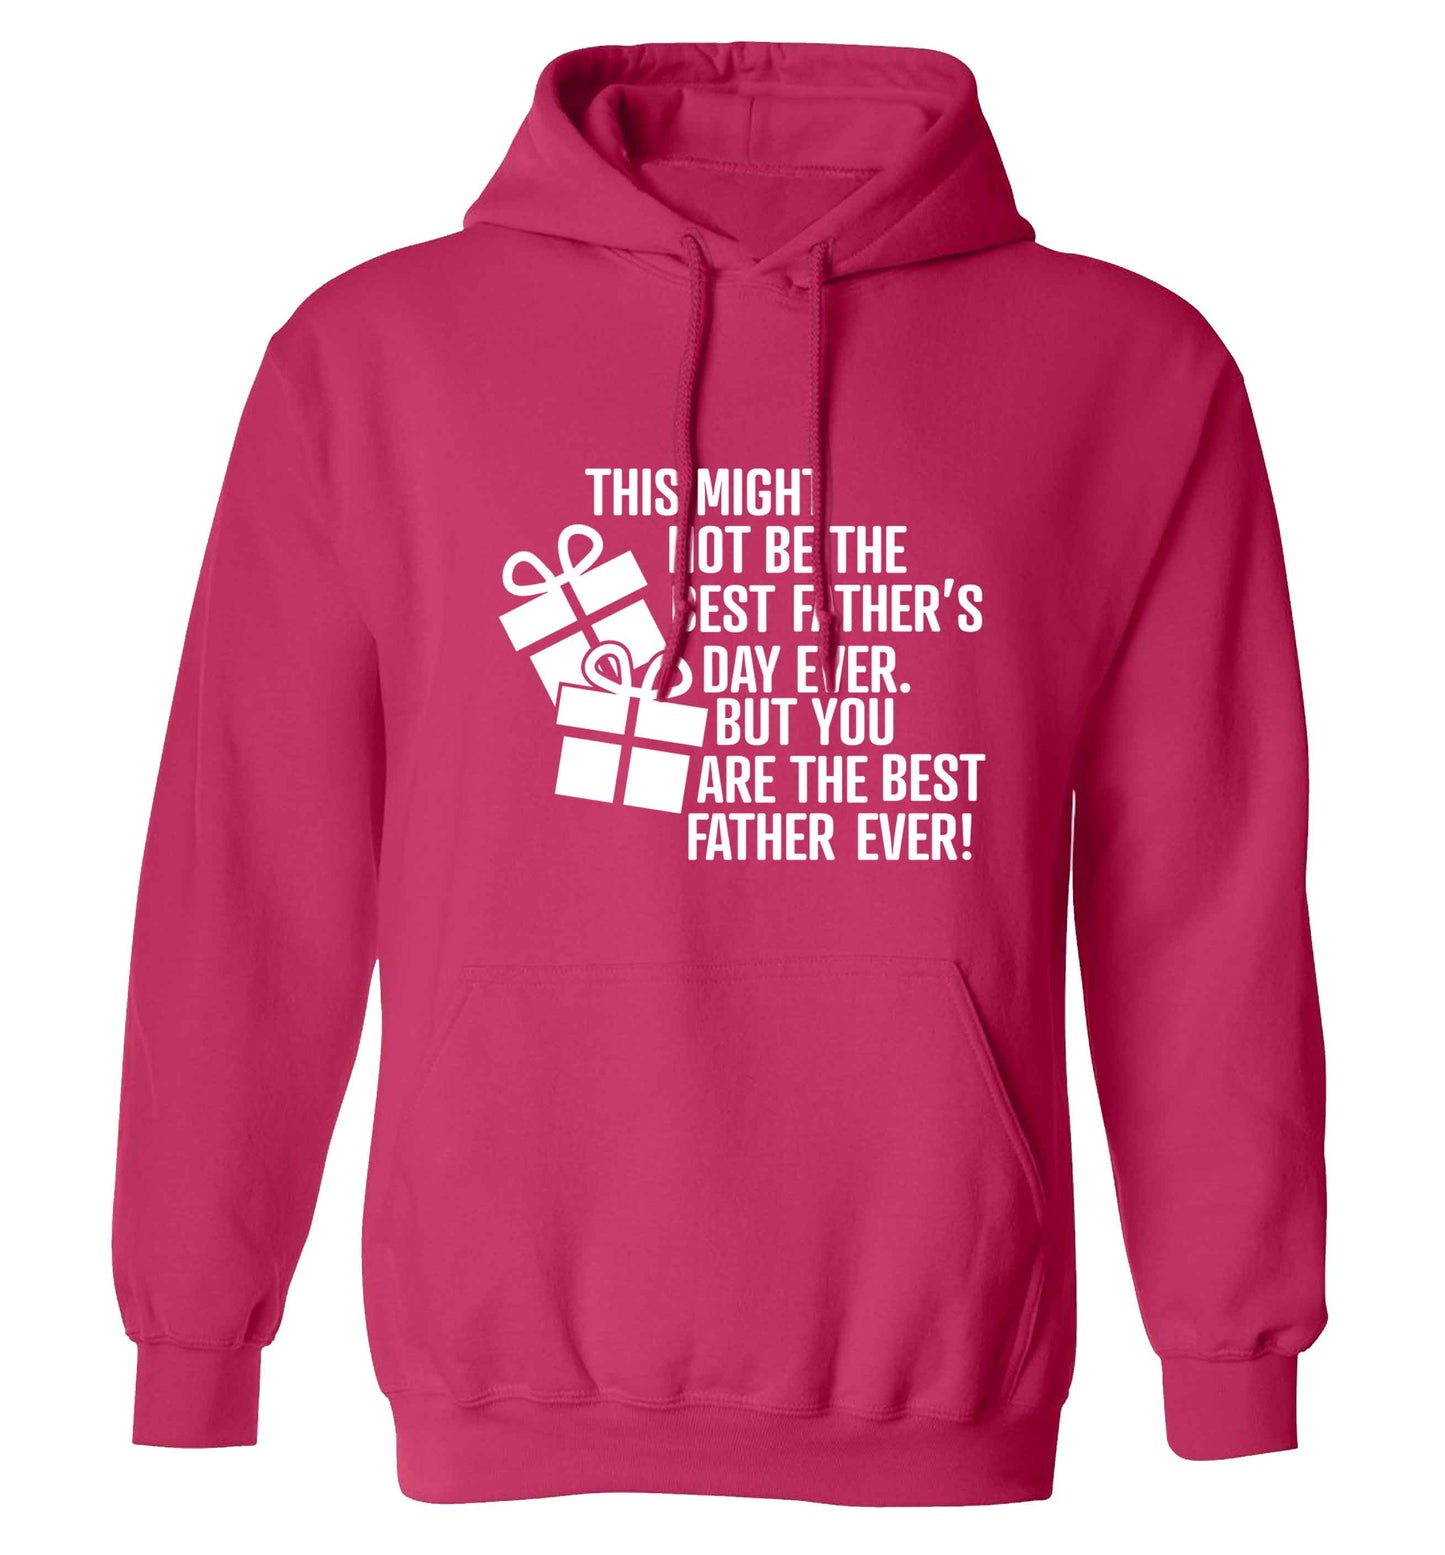 It might not be the best Father's Day ever but you are the best father ever! adults unisex pink hoodie 2XL